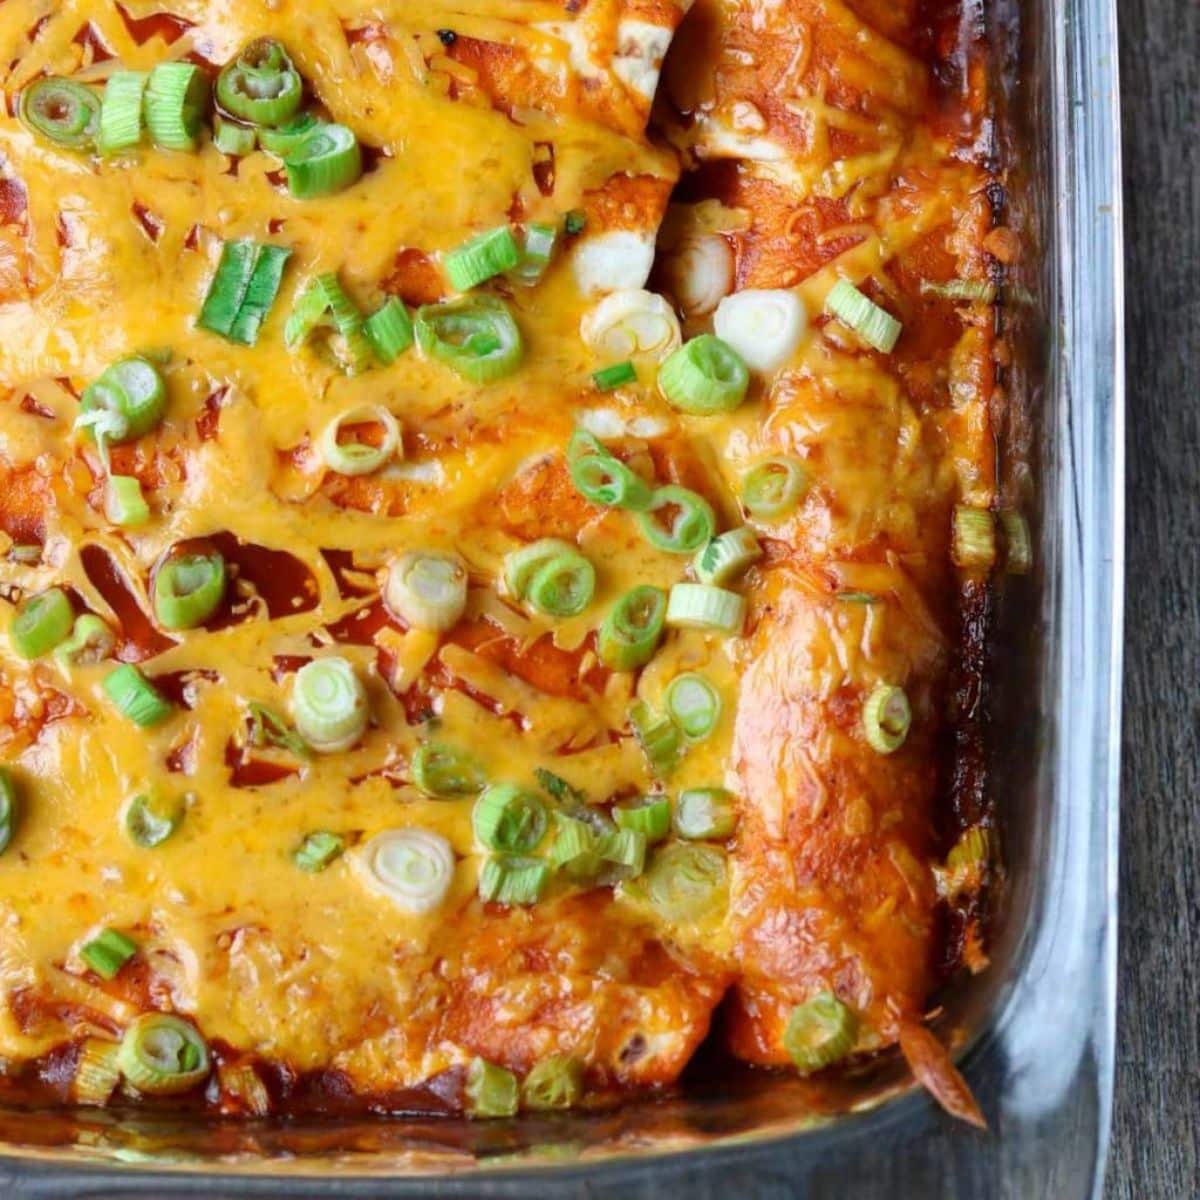 chicken enchiladas in a 9x13 pan with cheese melted on top and garnished with green onions